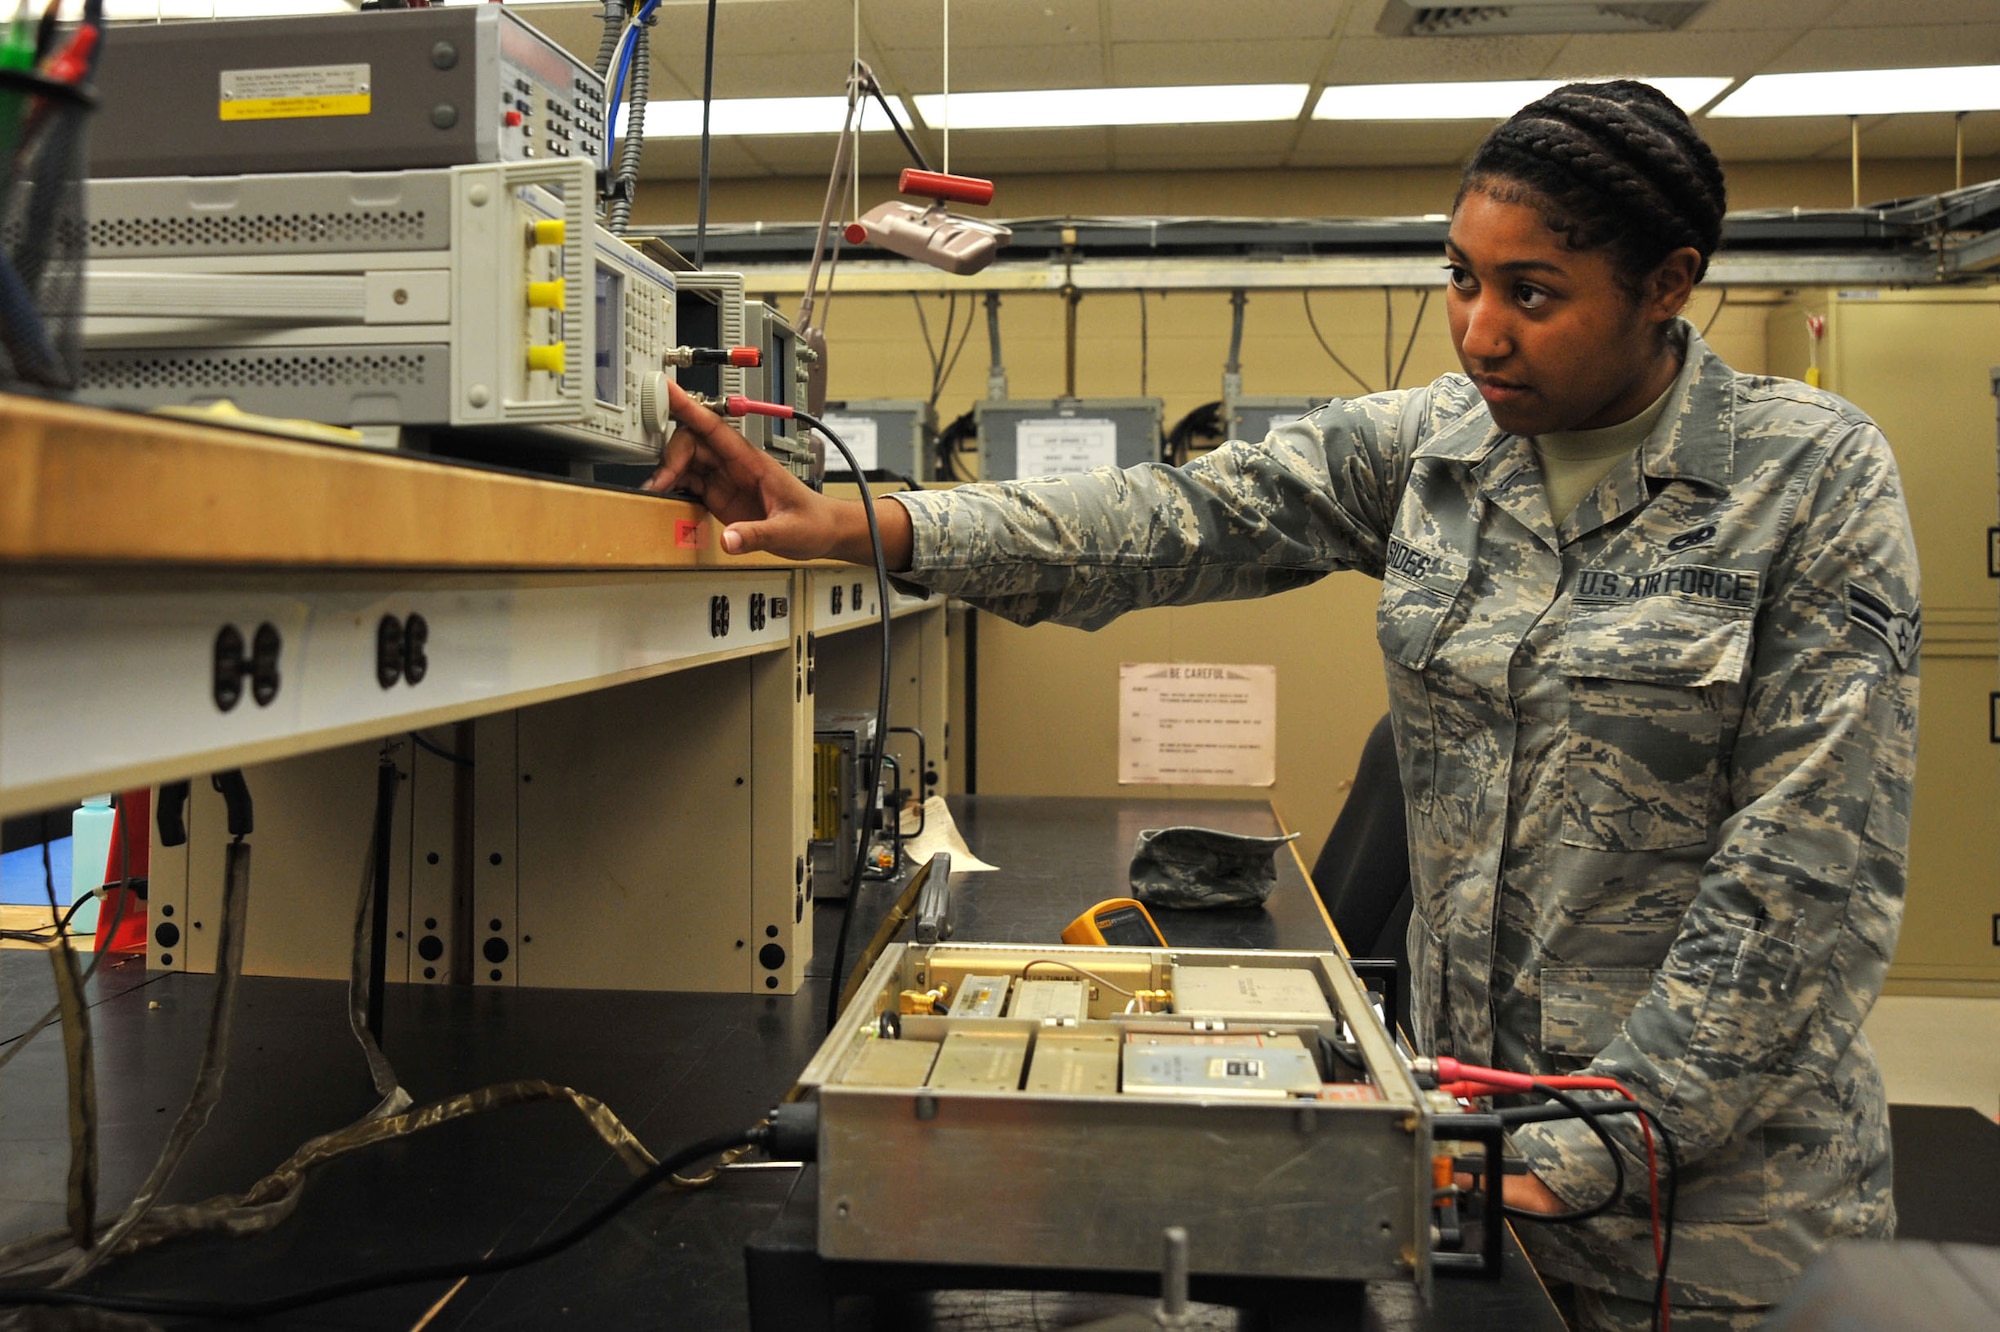 U.S. Air Force Airman 1st Class Darricka Sides, 20th Operations Support Squadron airfield systems technician, sets up a signal generator for radio receiver tuning at Shaw Air Force Base, S.C., Oct. 4, 2017.